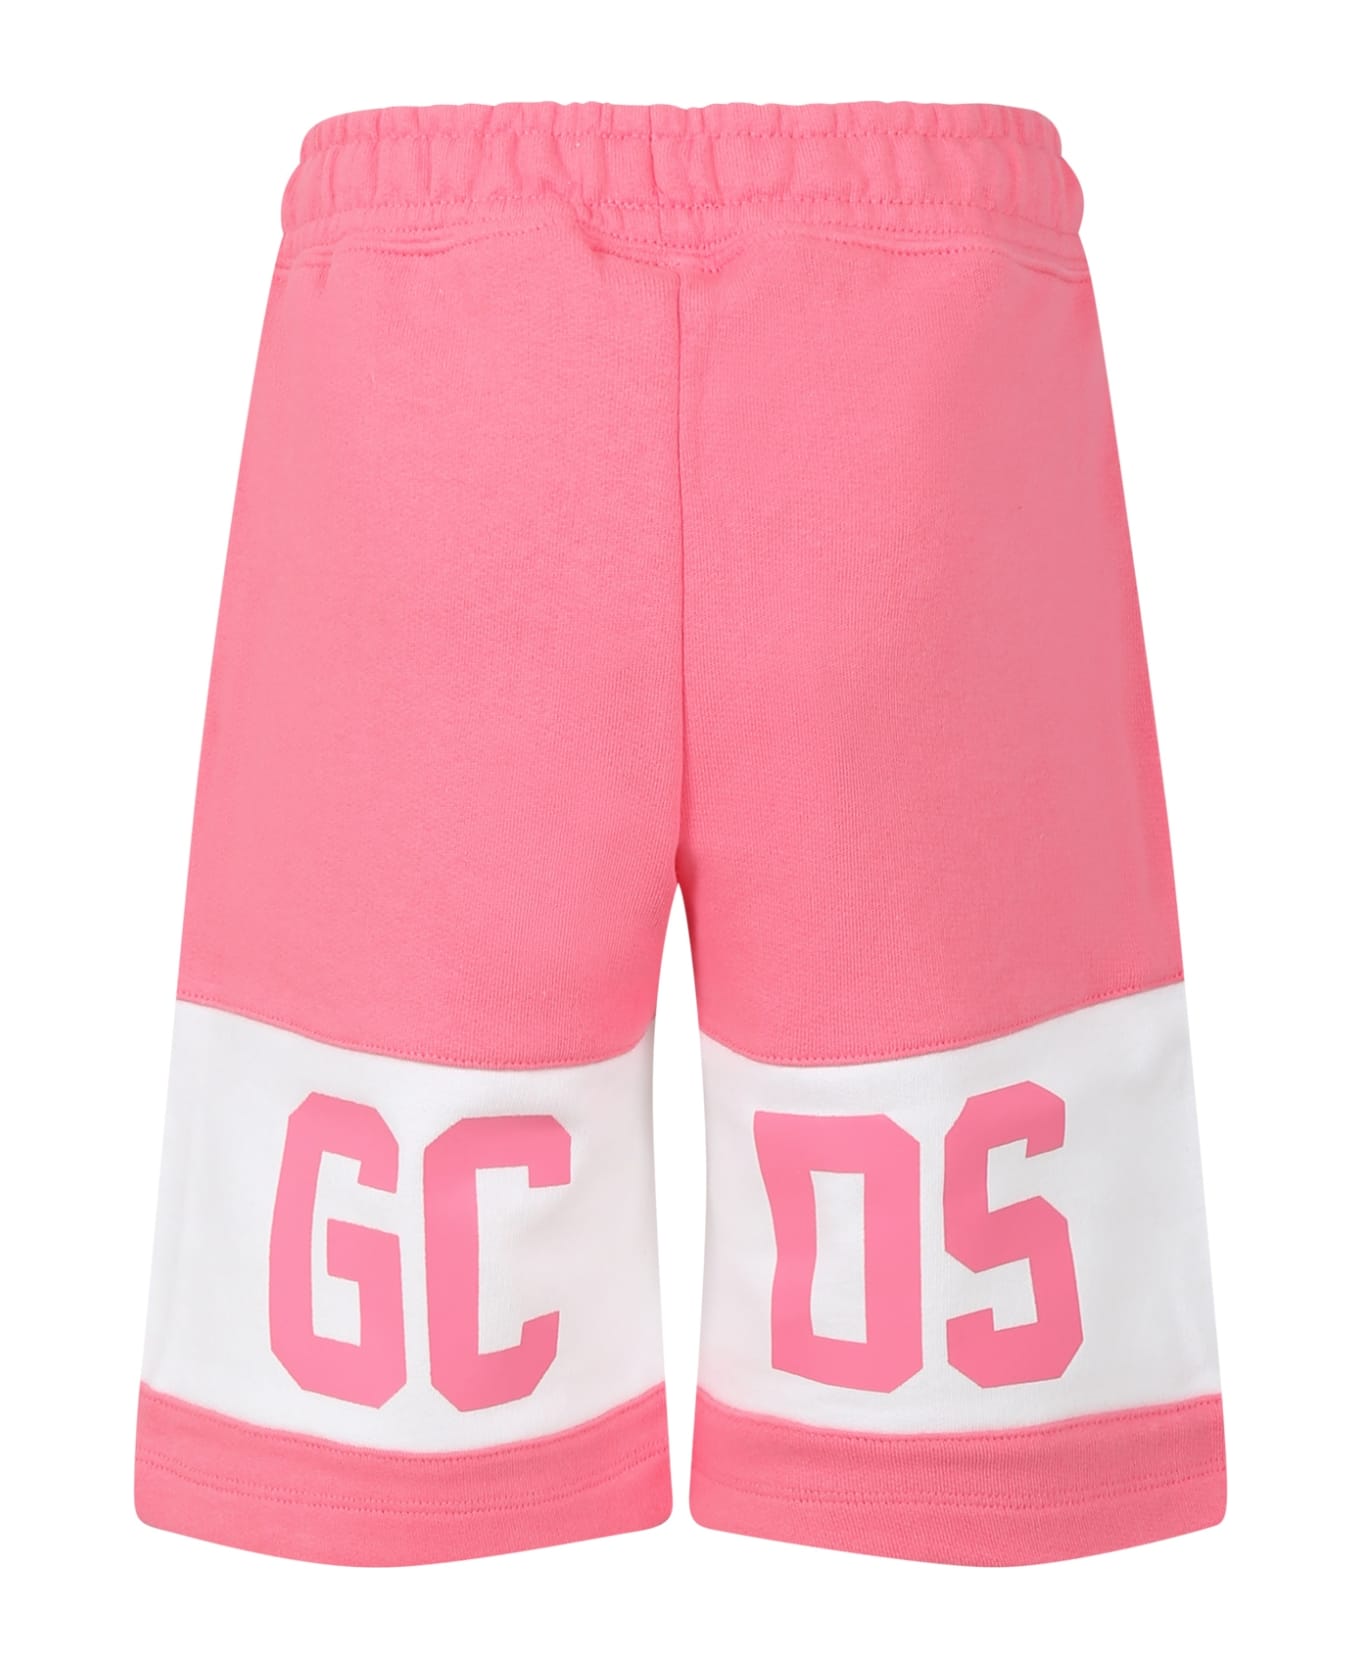 GCDS Mini Pink Sports Shorts For Boy With Logo - Pink ボトムス